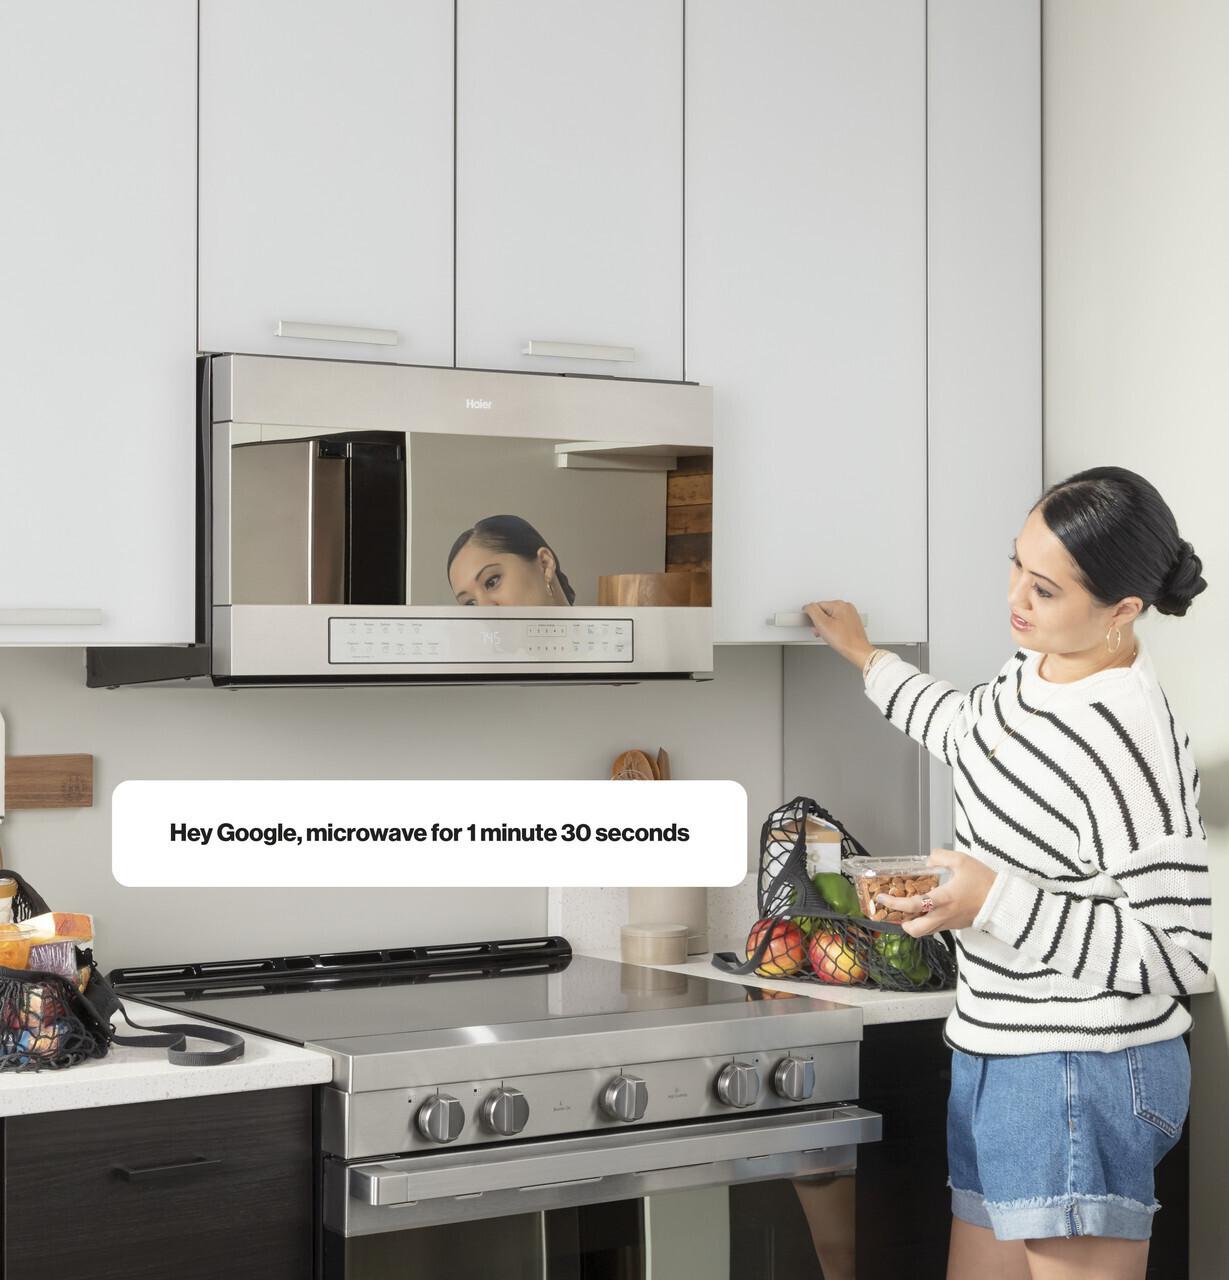 30" 1.6 Cu. Ft. Smart Over-the-Range Microwave Oven